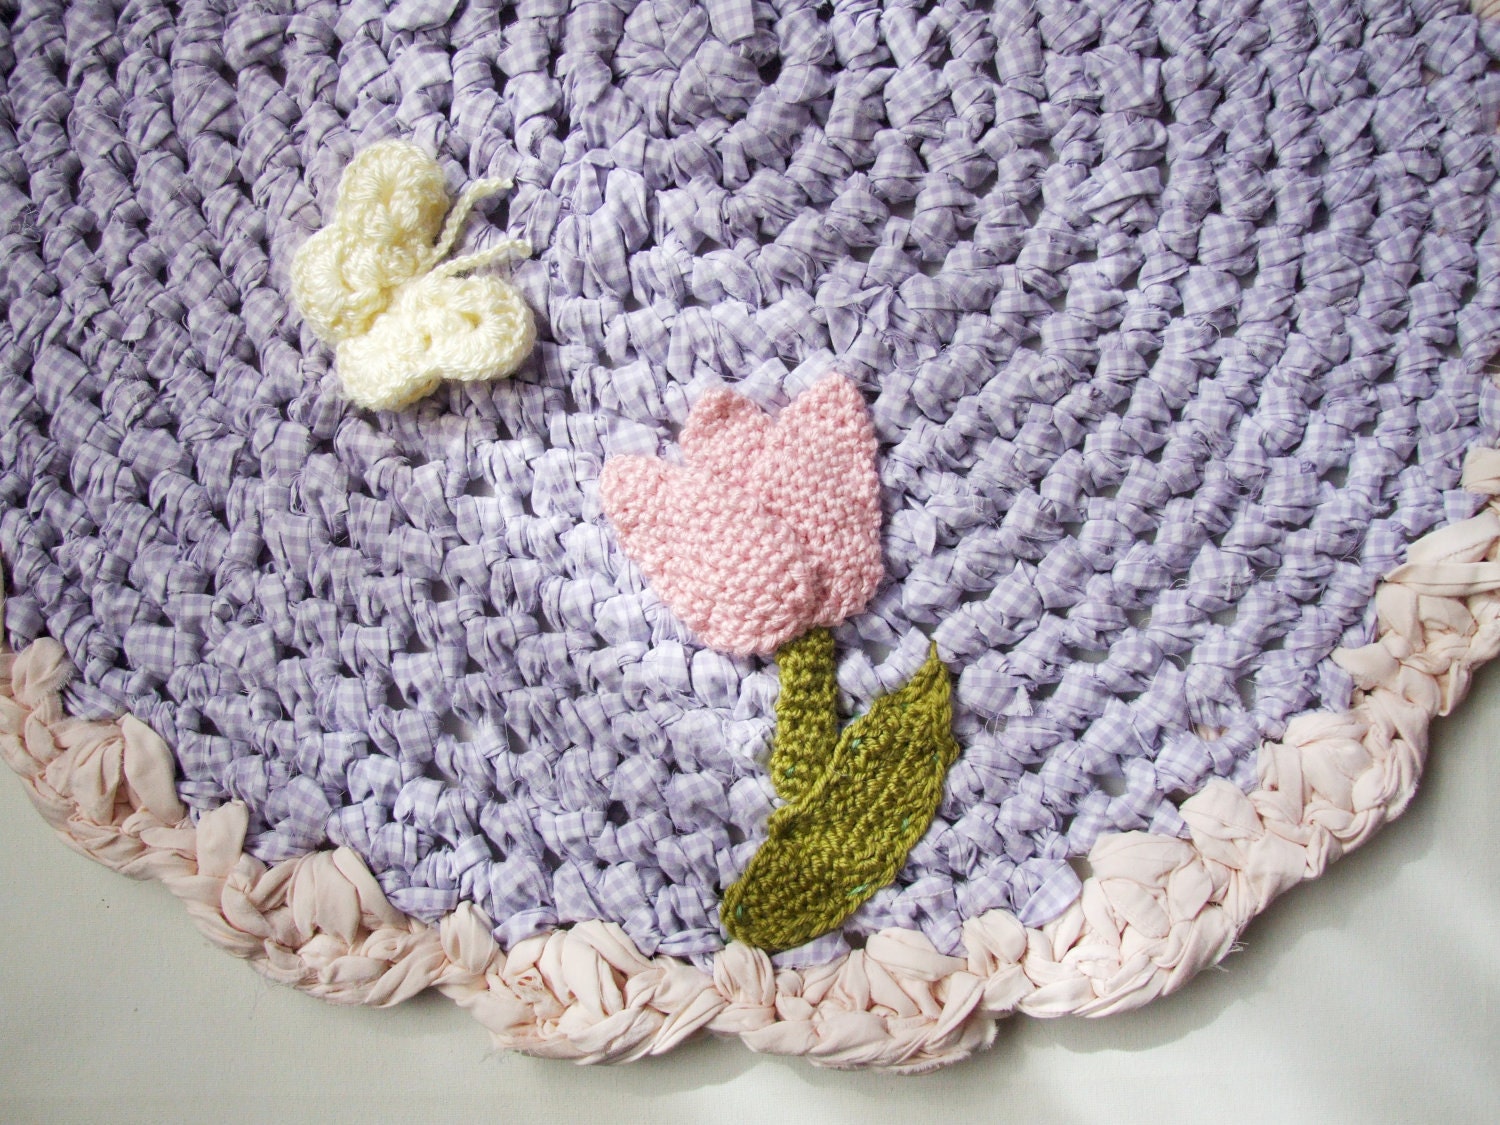 Upcycled Crochet Rug Children's Nursery Rug Purple Gingham with Crochet Tulip Flower and Butterfly as Featured in Inside Crochet Magazine